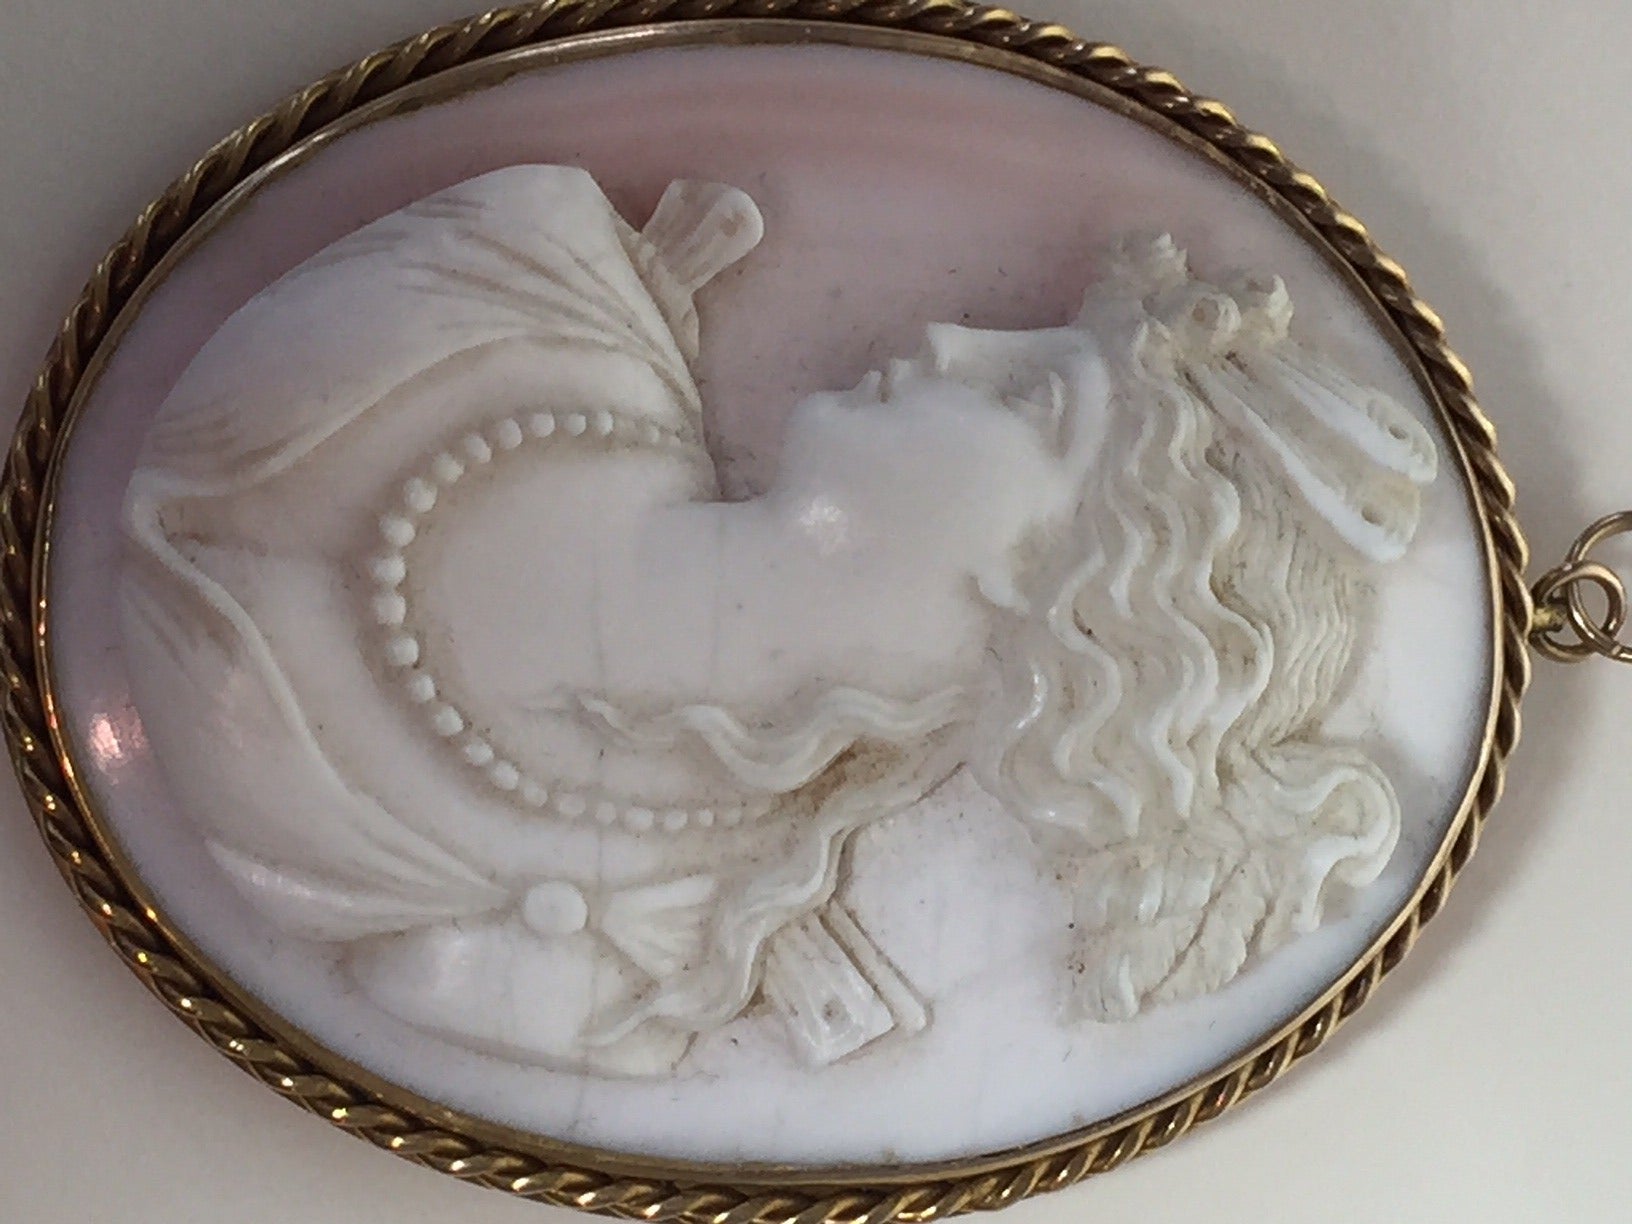 A lovely , large Victorian hand-carved shell cameo brooch/pendant with 14K gold framework.